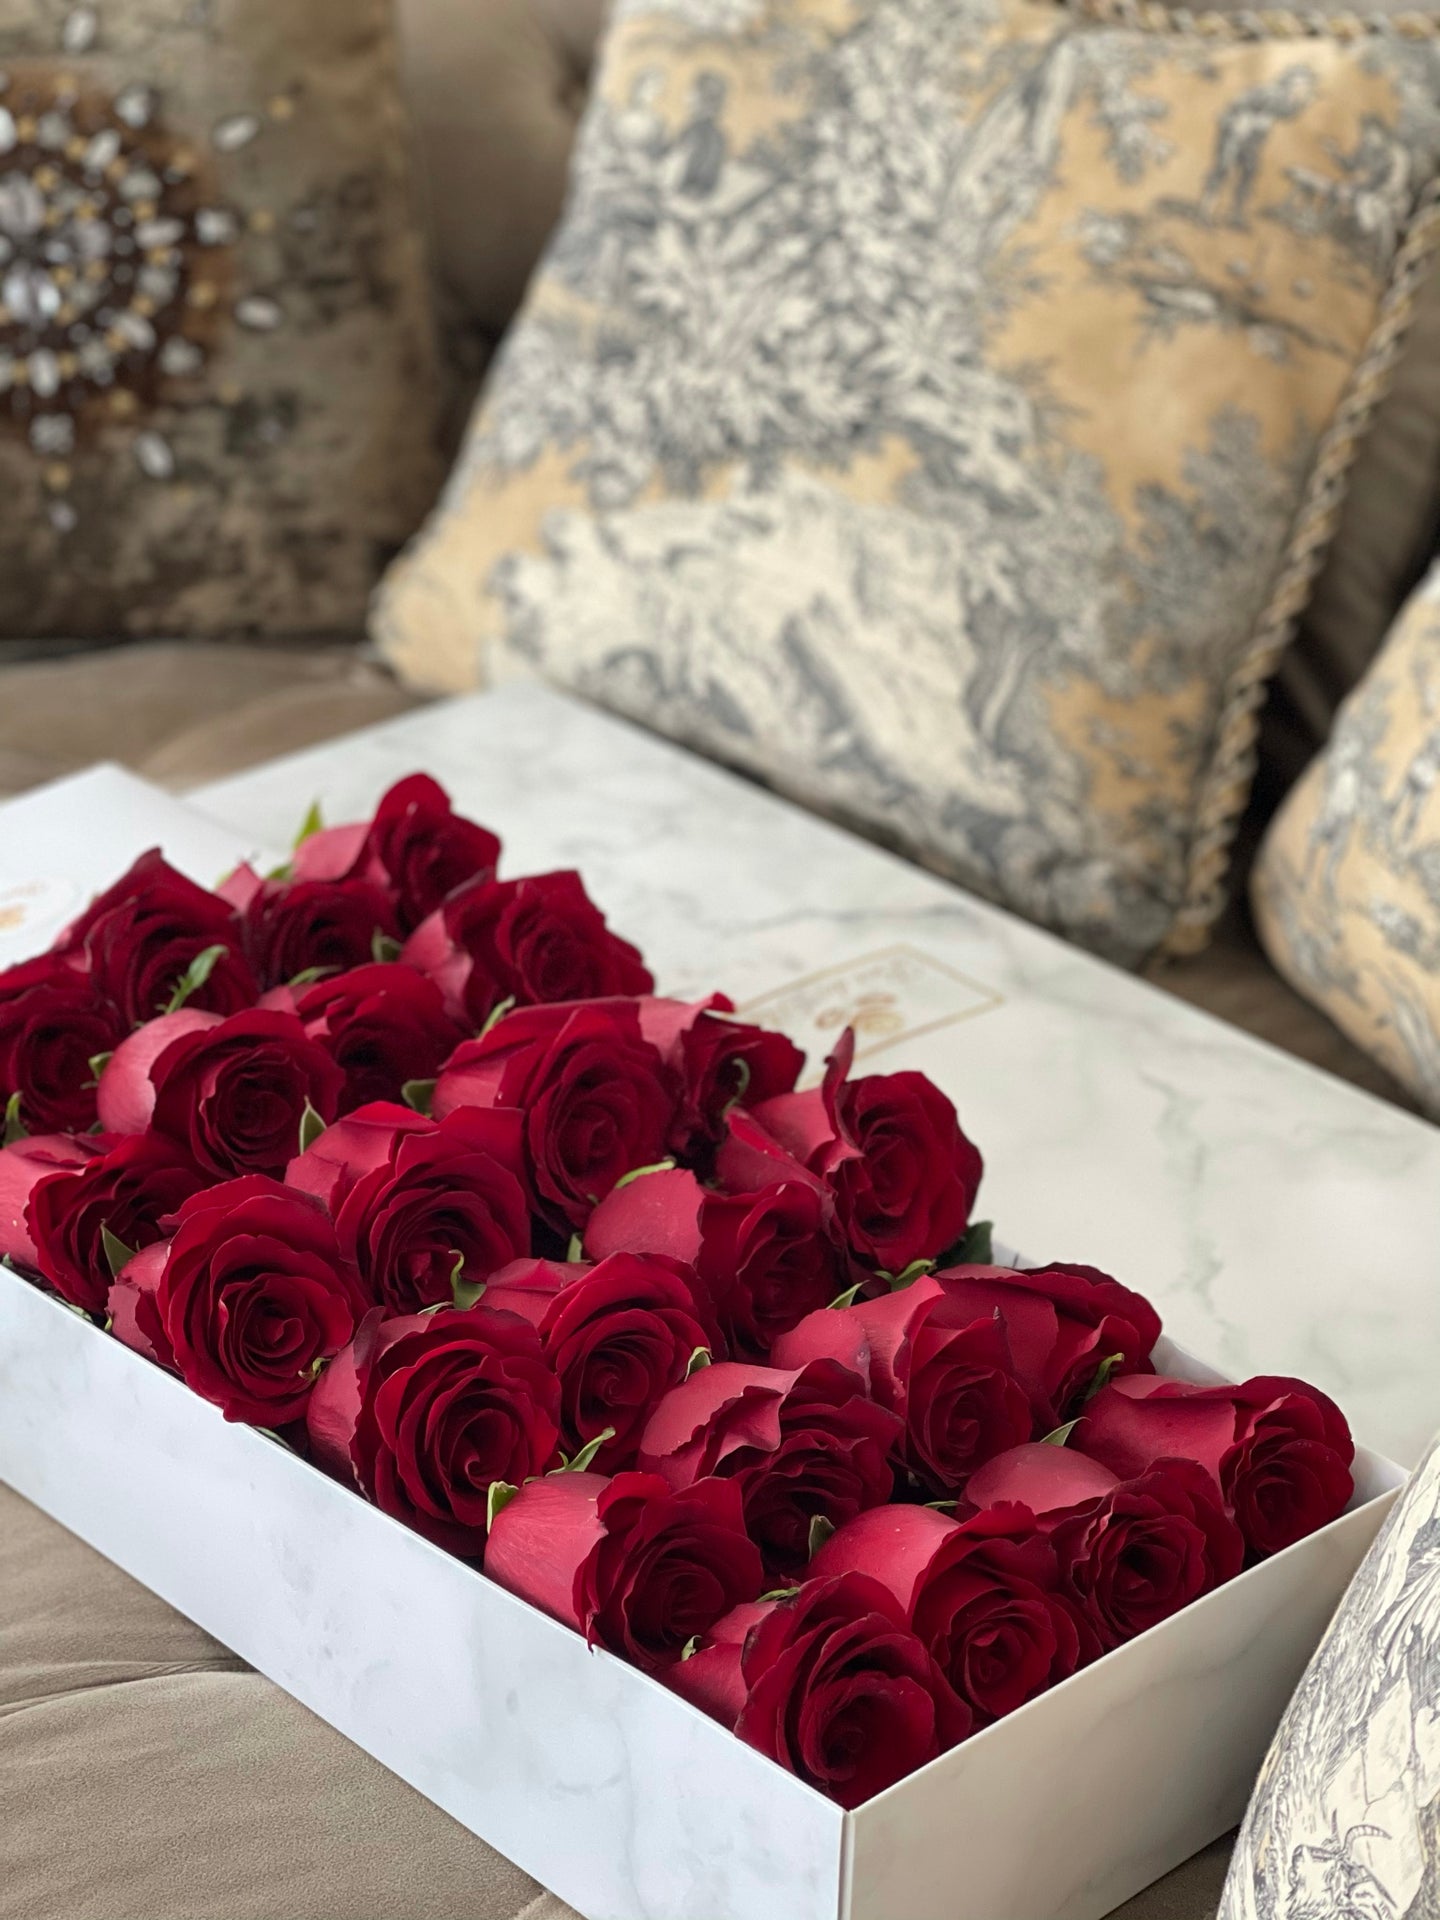 A close-up image of 24 red roses from Vancouver's Box Des Fleurs in a Luxury Marble Box. The elegant white marble complements the rose's natural beauty. Perfect for a sophisticated and romantic gift or decoration. Order now for fresh, handcrafted flowers from Vancouver's premier florist.